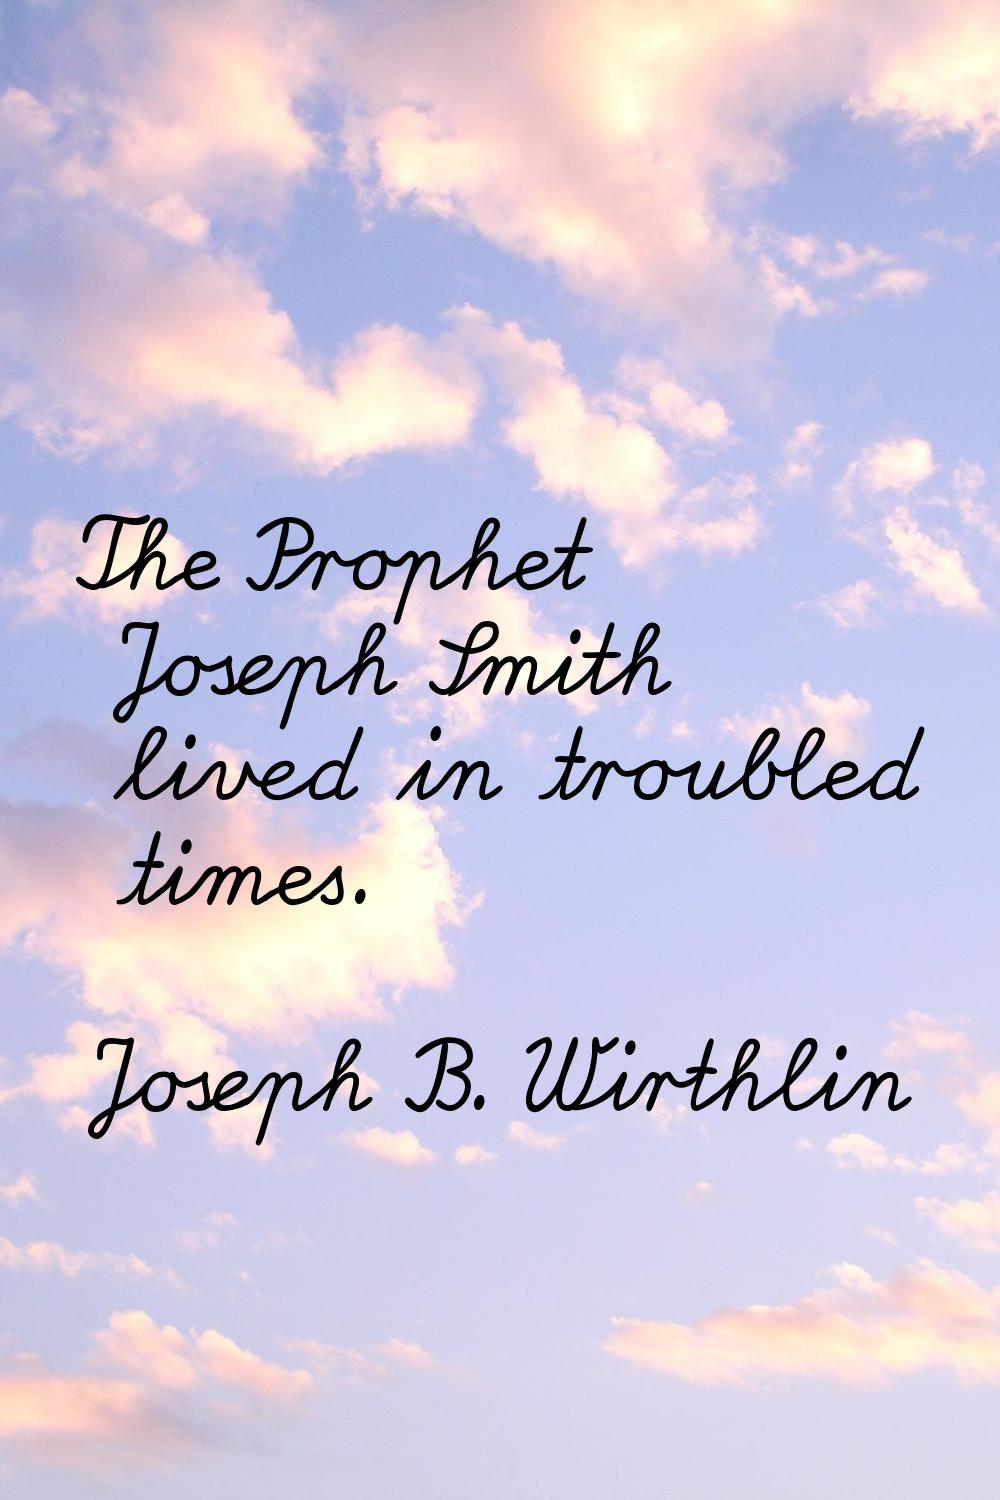 The Prophet Joseph Smith lived in troubled times.